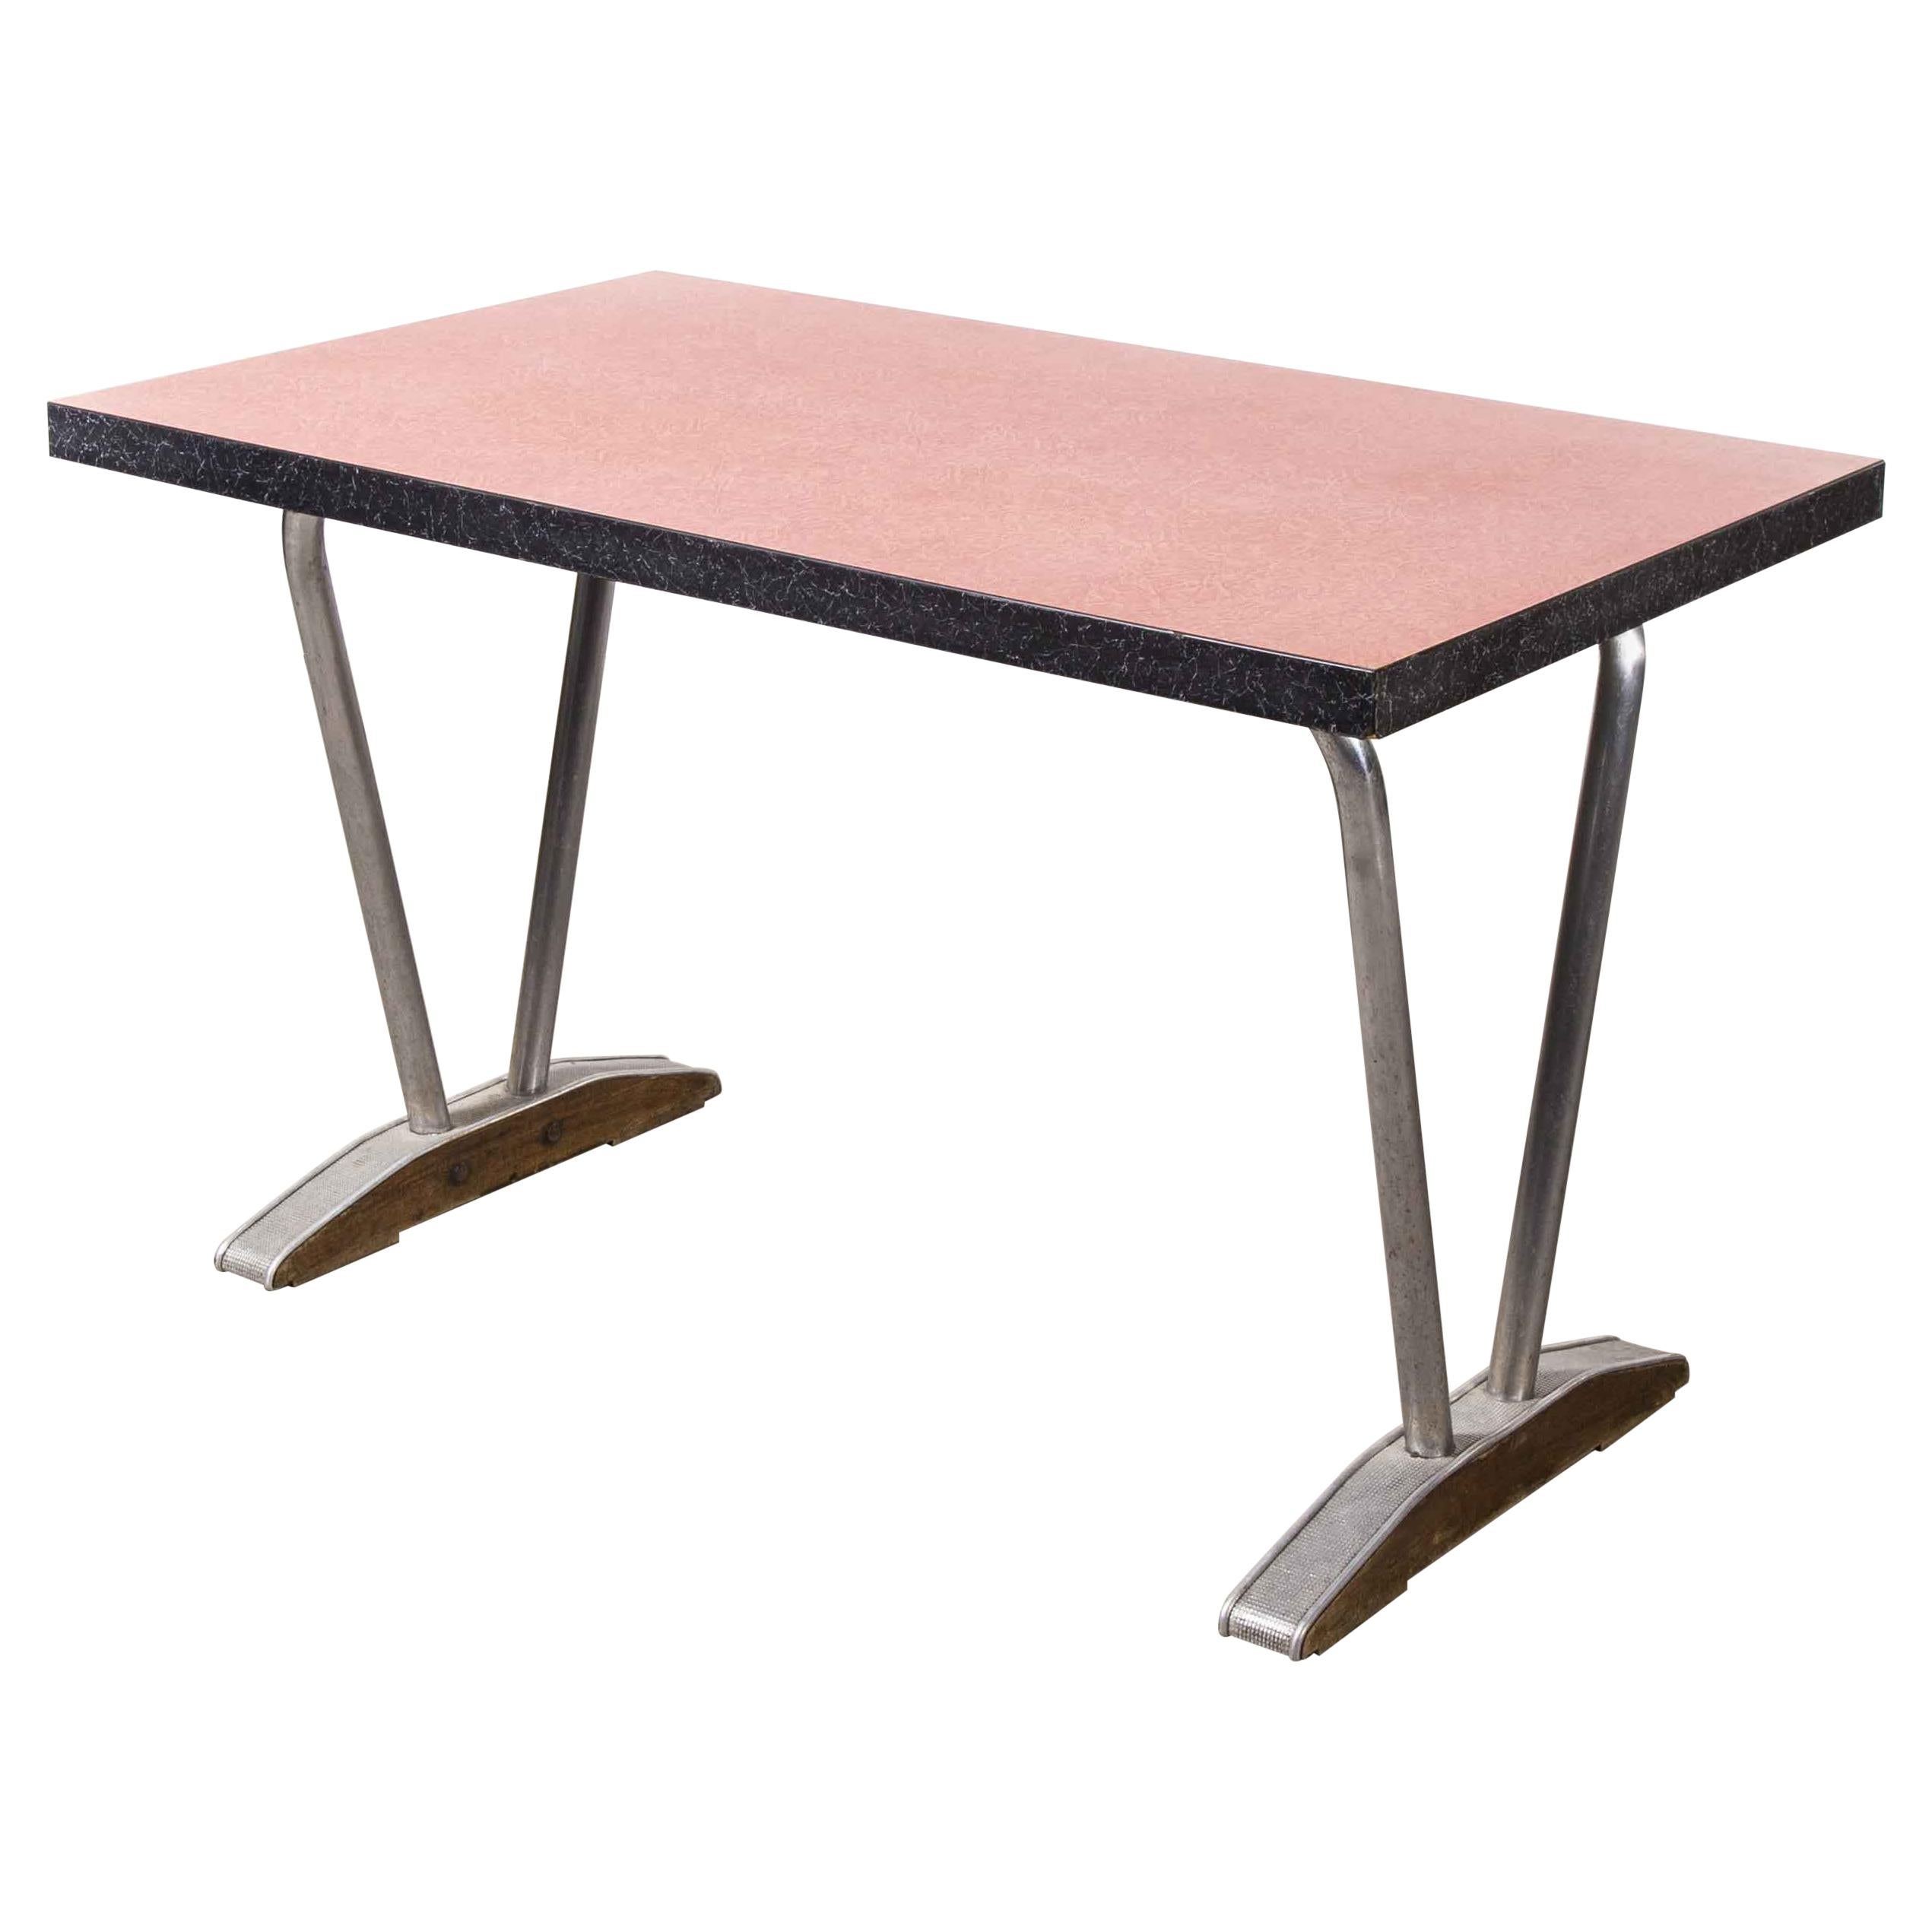 1960’s French Red Laminate Dining Table with Aluminium Base, Rectangular For Sale